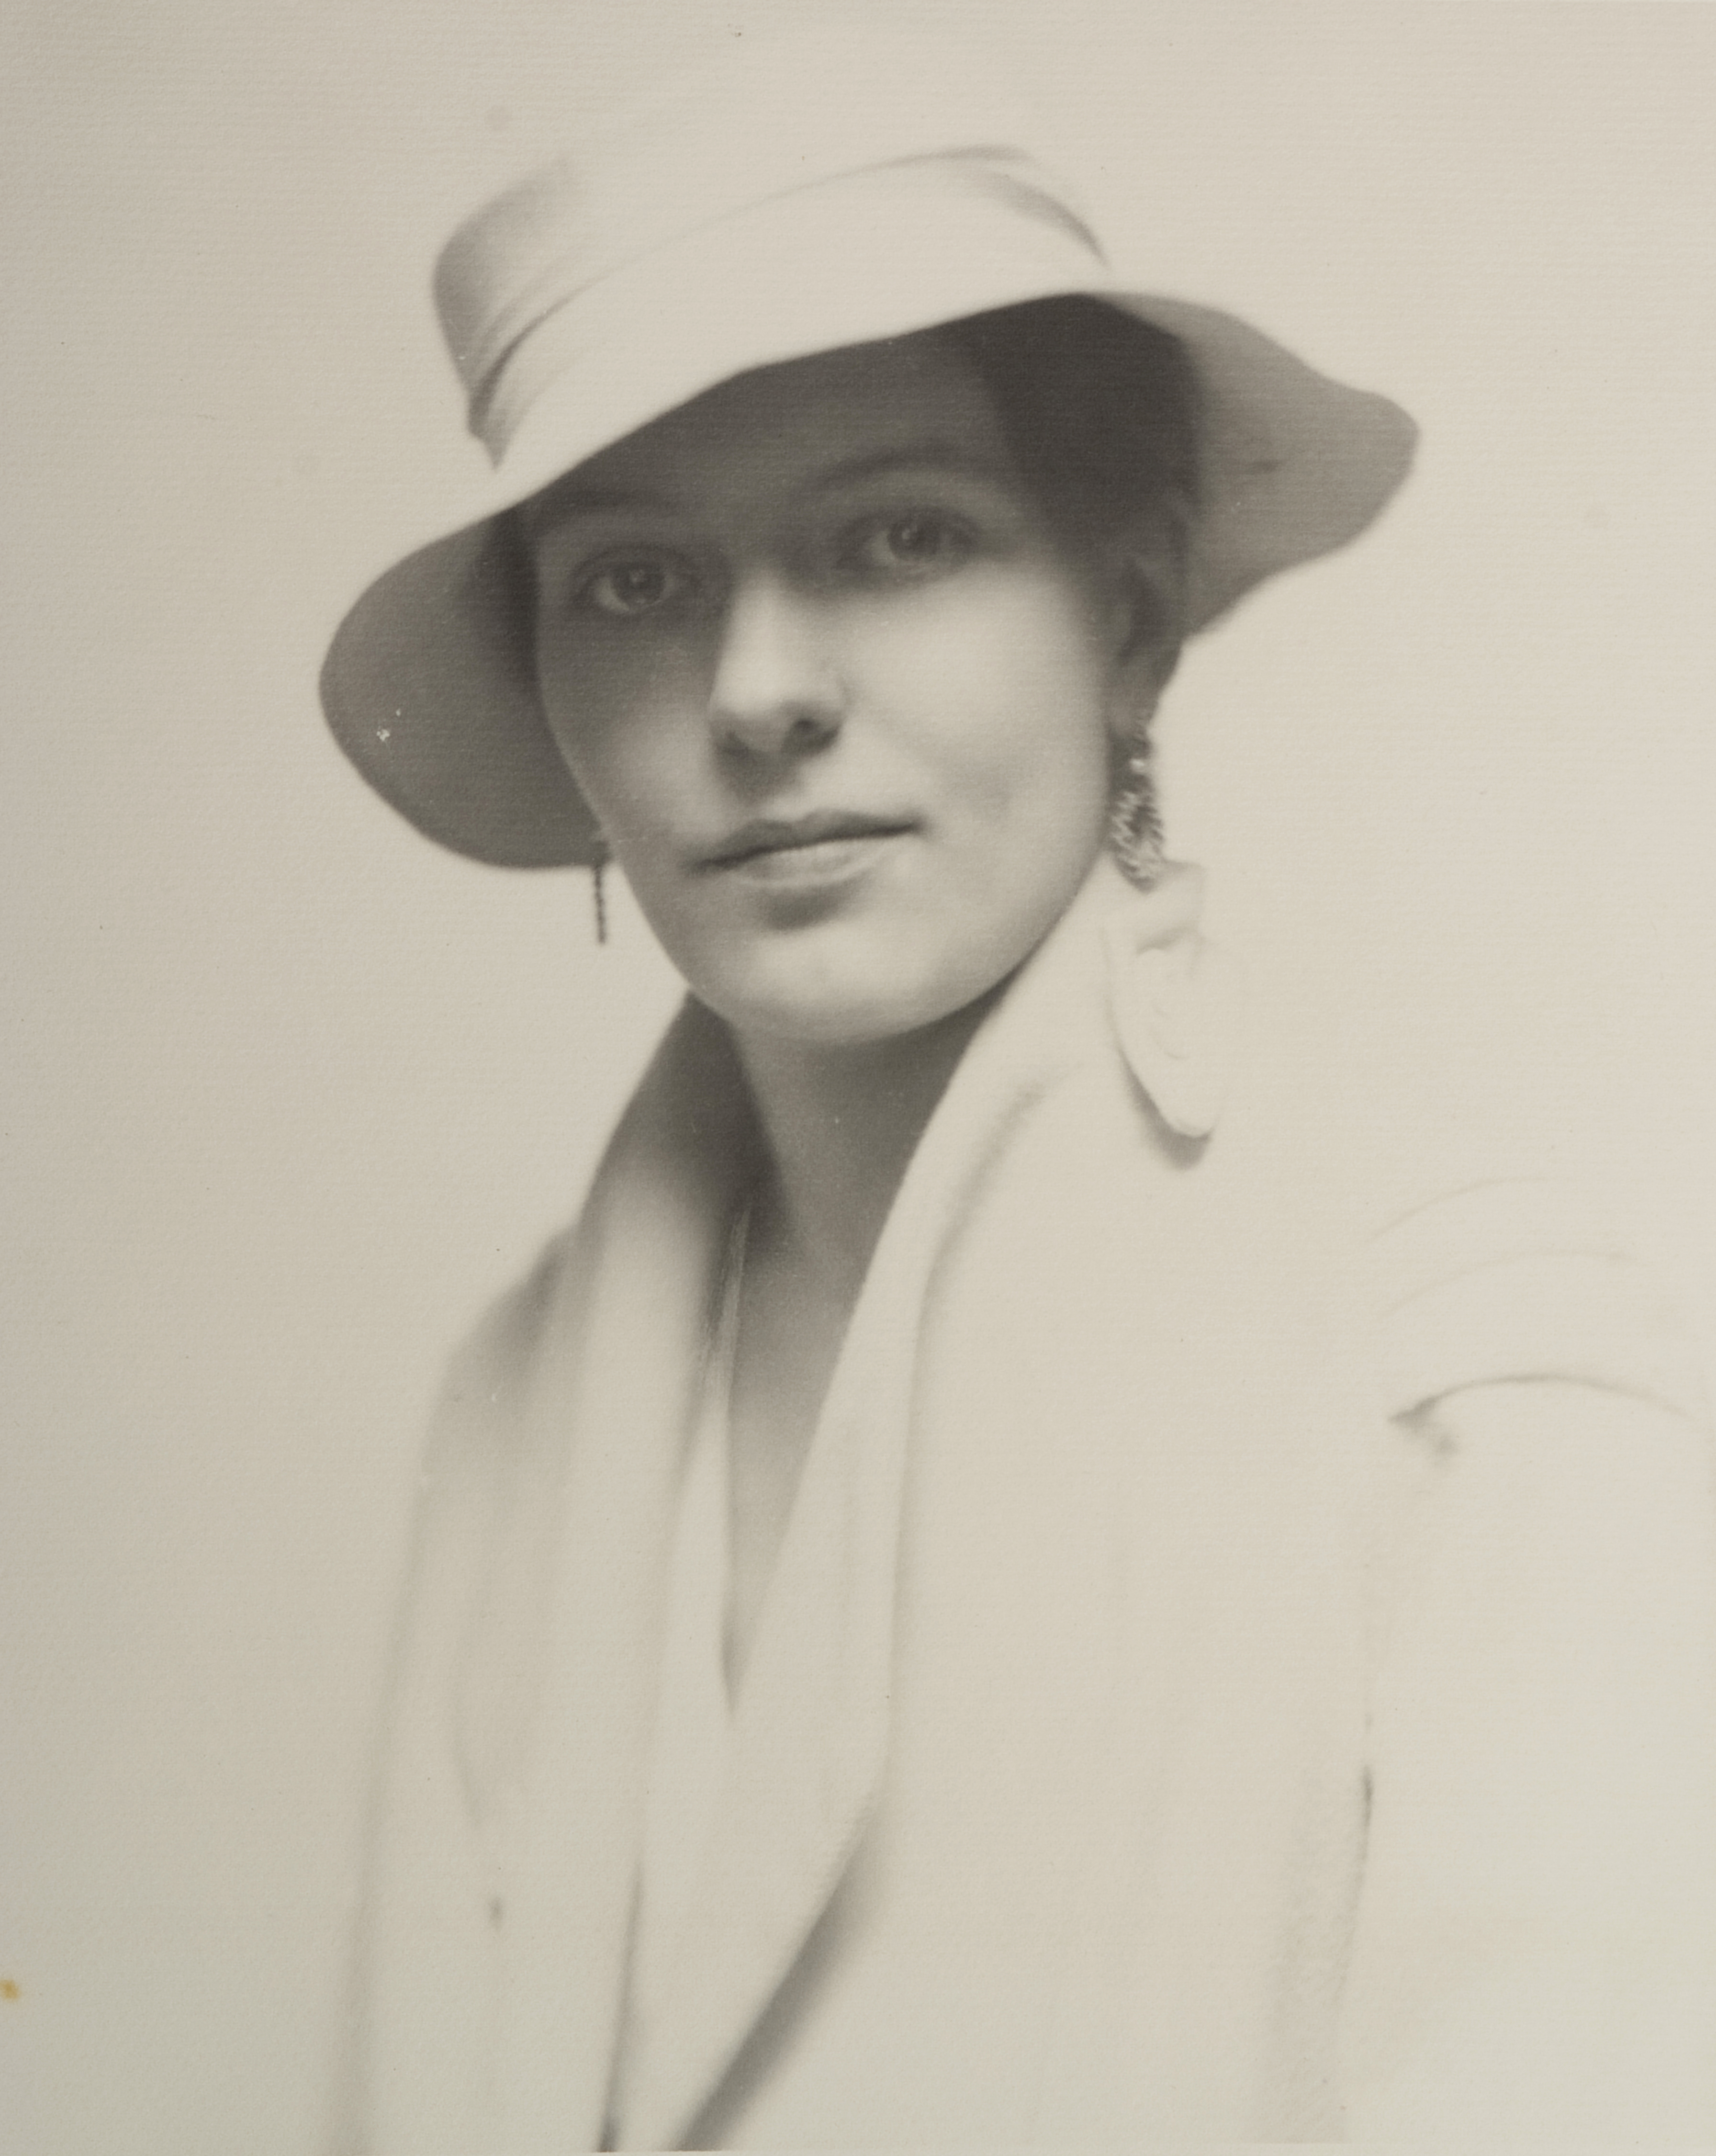 Portrait of woman wearing earrings, white hat, white coat, looking at camera